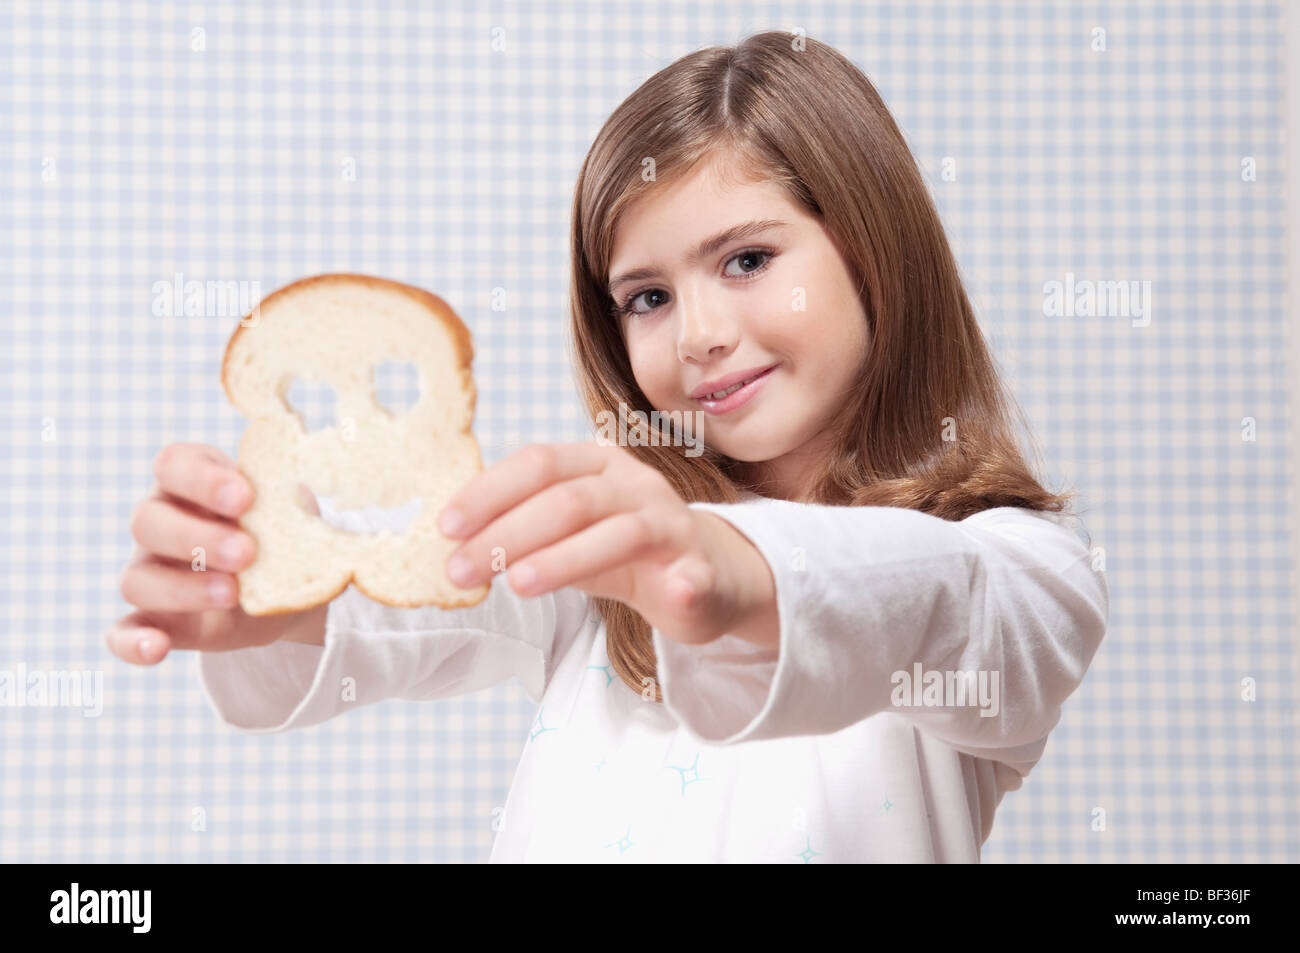 Girl holding a slice of bread with smiley face Stock Photo